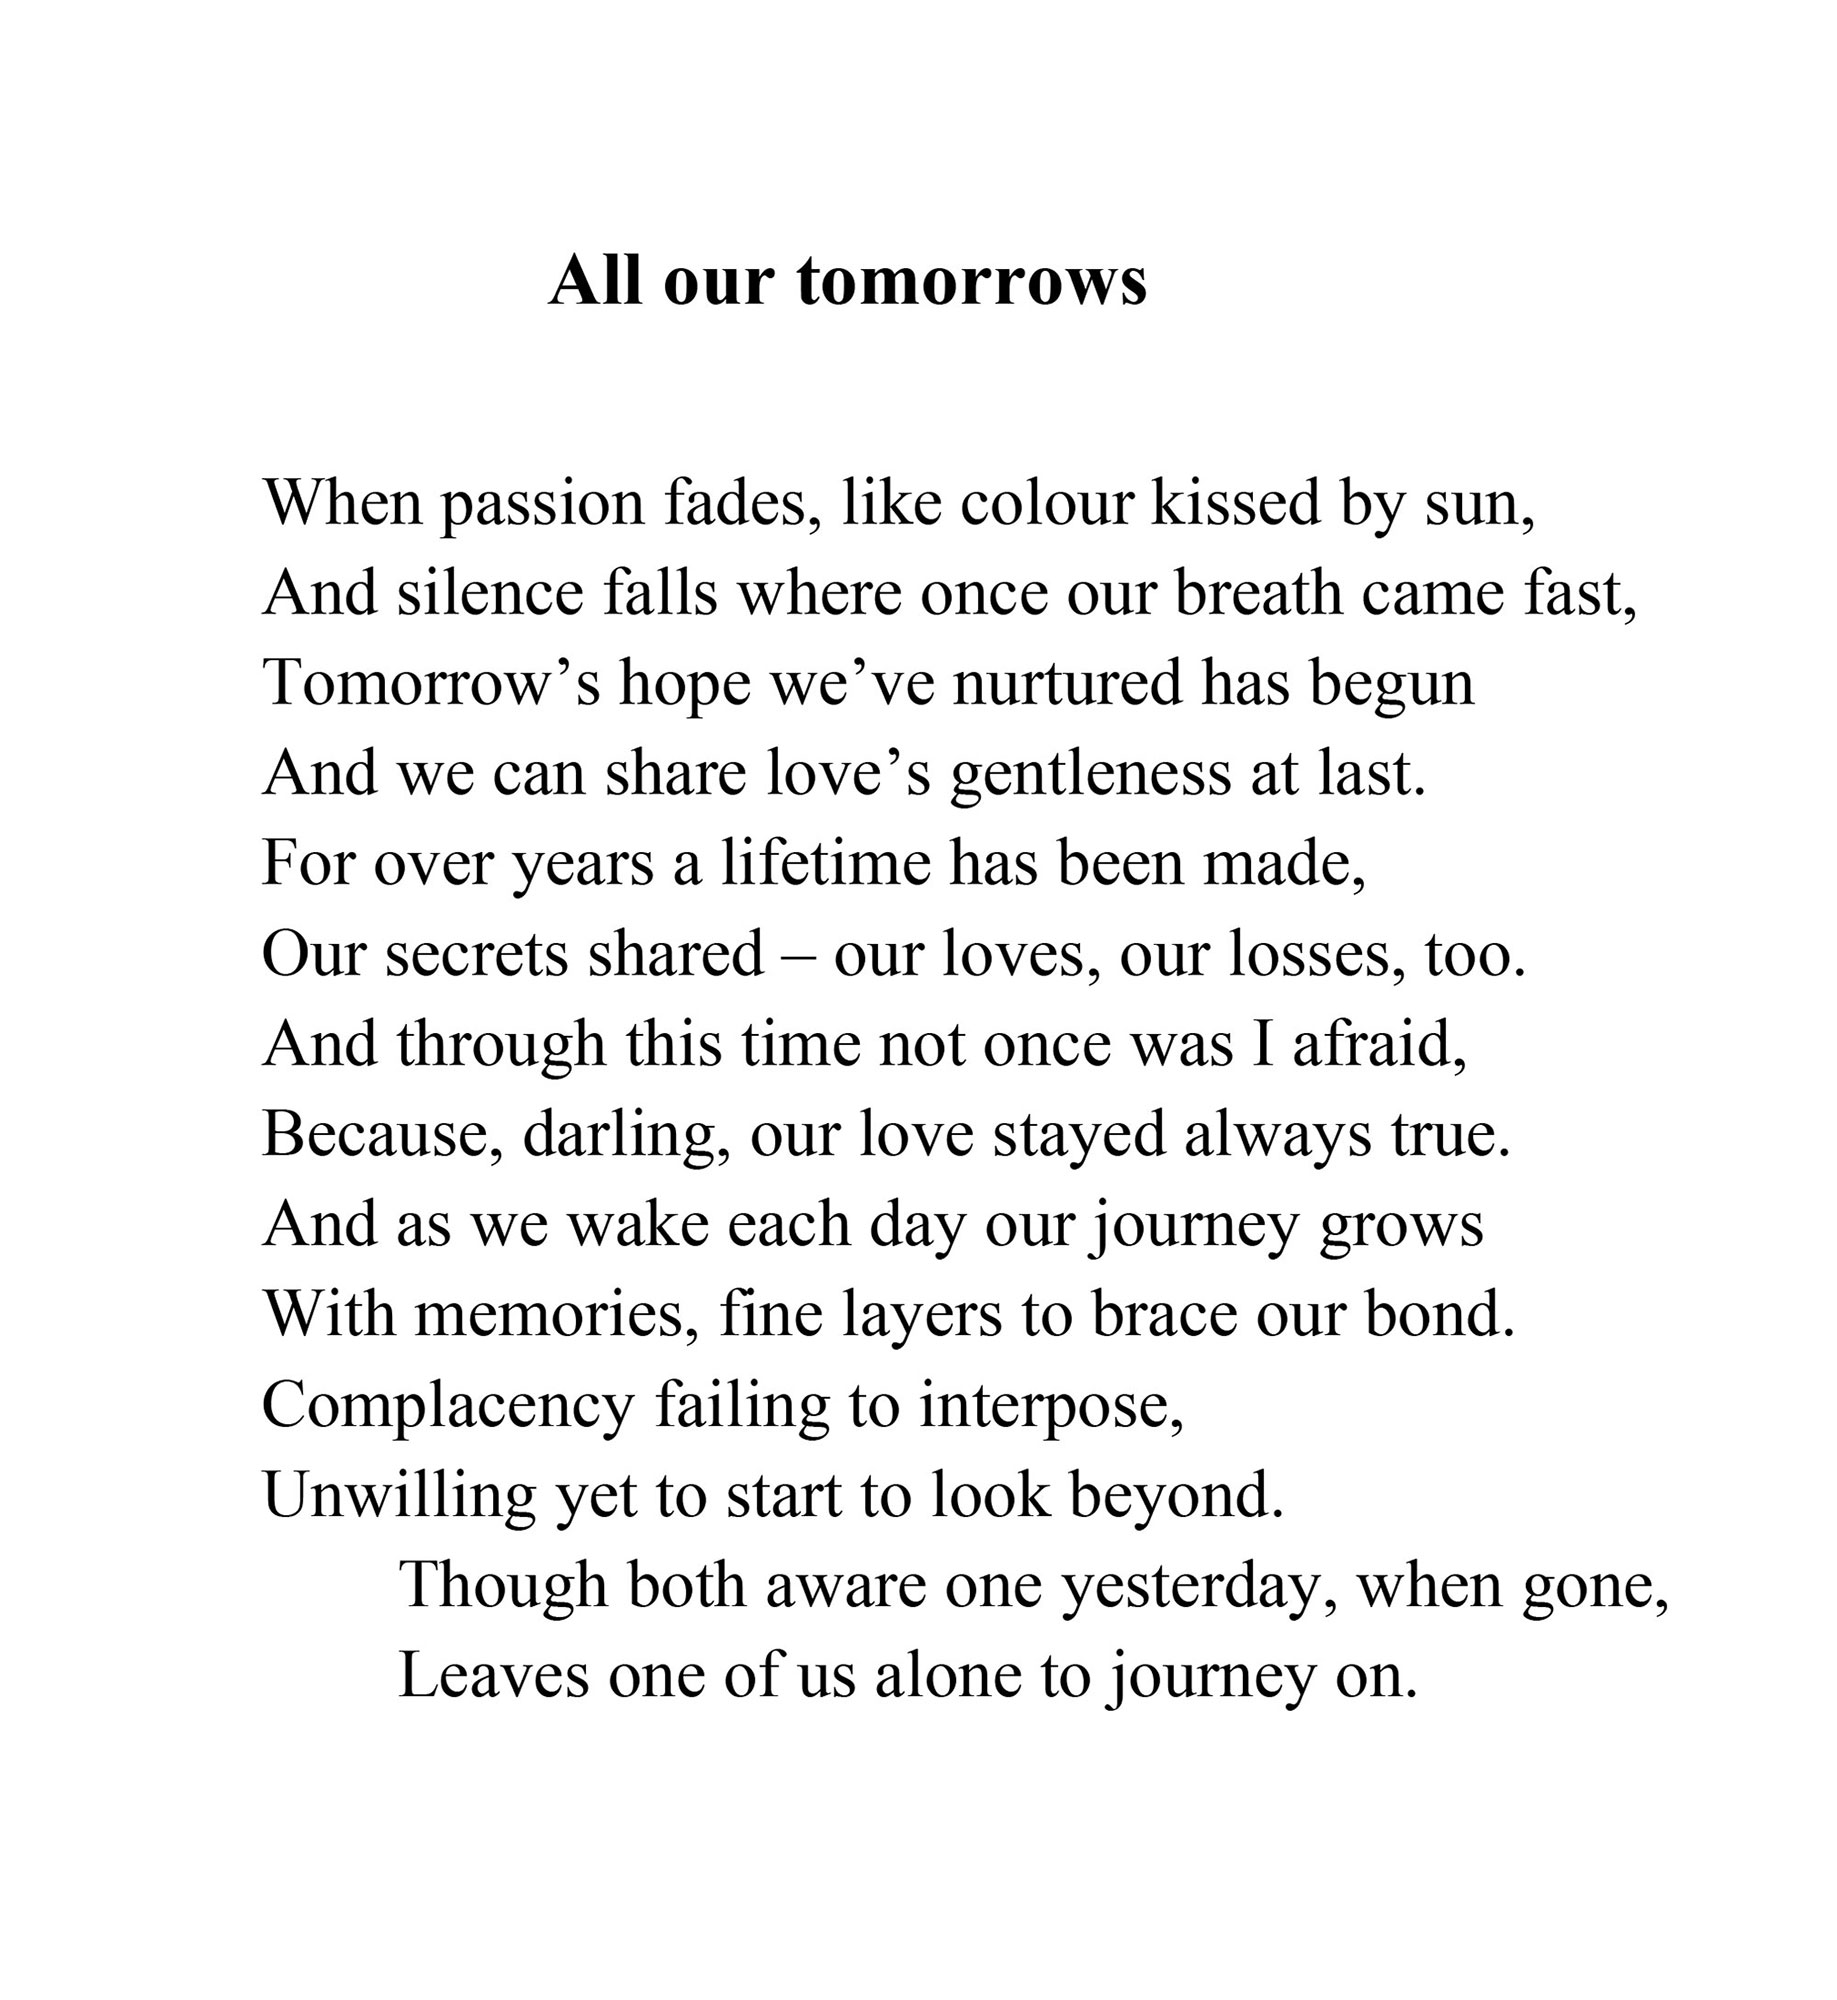 Ali Seegar, 'All our tomorrows' -<br />
When passion fades, like colour kissed by sun,<br />
And silence falls where once our breath came fast,<br />
Tomorrow’s hope we’ve nurtured has begun<br />
And we can share love’s gentleness at last.<br />
For over years a lifetime has been made,<br />
Our secrets shared – our loves, our losses, too.<br />
And through this time not once was I afraid,<br />
Because, darling, our love stayed always true.<br />
And as we wake each day our journey grows<br />
With memories, fine layers to brace our bond.<br />
Complacency failing to interpose,<br />
Unwilling yet to start to look beyond.<br />
Though both aware one yesterday, when gone,<br />
Leaves one of us alone to journey on.